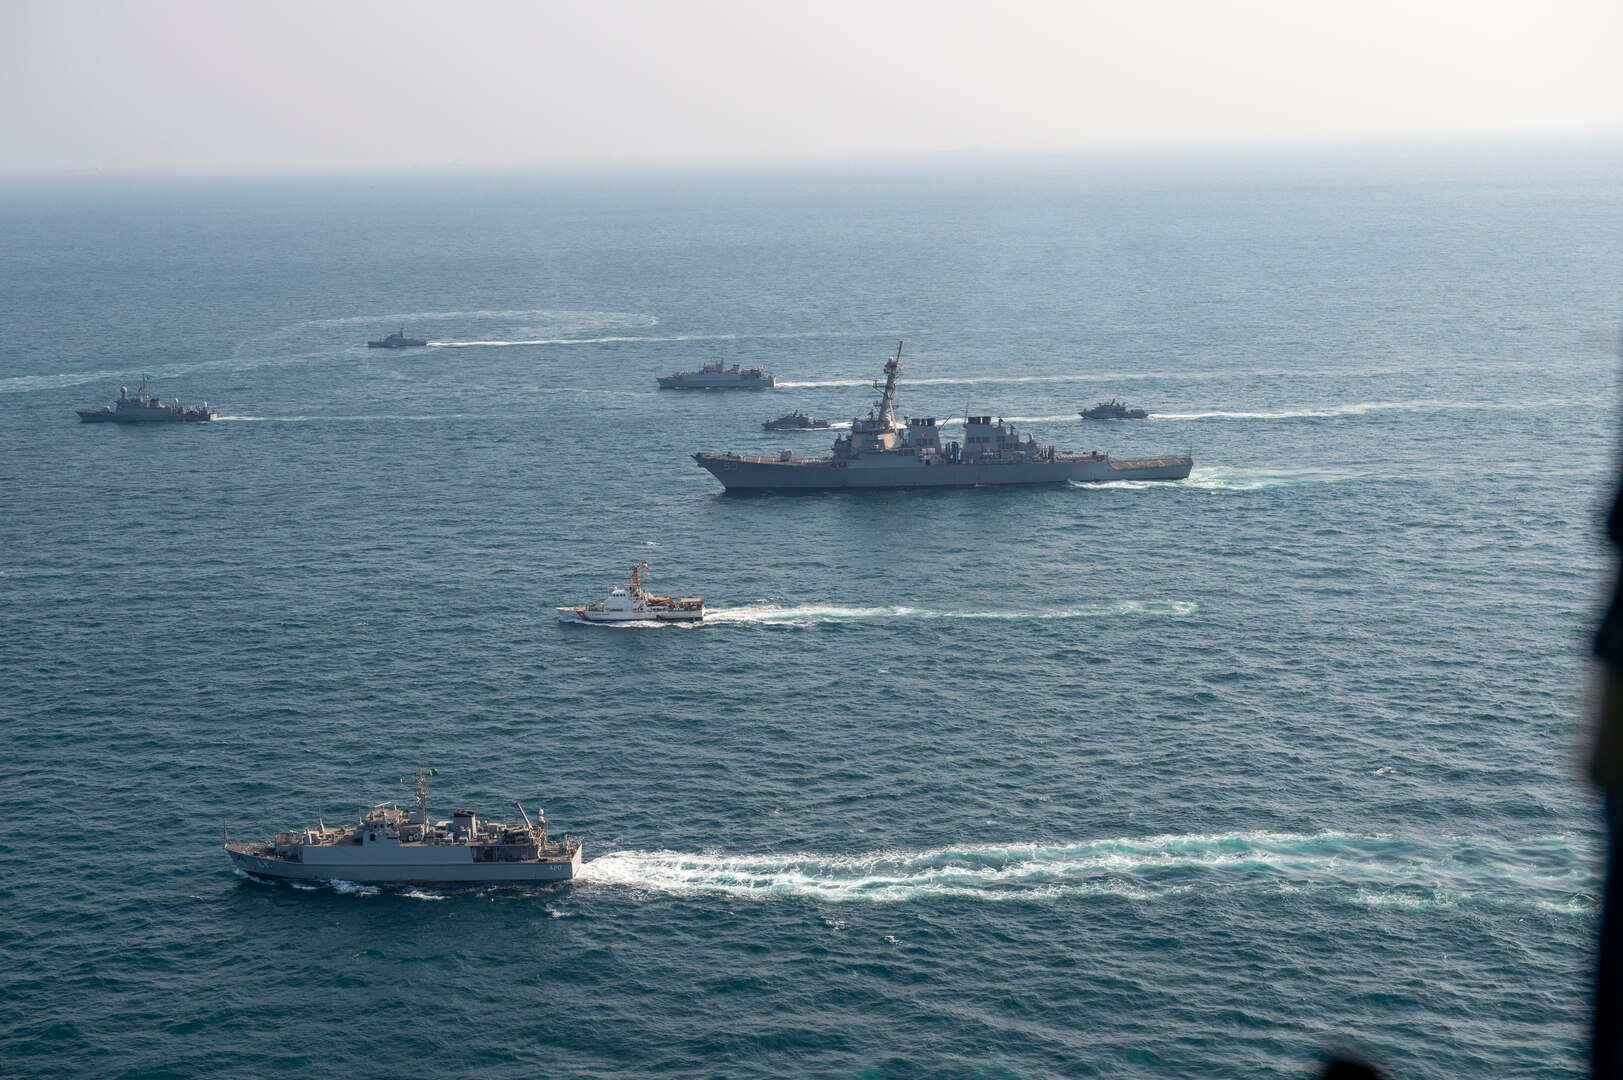 210124-N-XG173-1553 ARABIAN GULF (Jan. 24, 2020) Royal Saudi Naval Force ships and U.S. Navy sail in formation during exercise Nautical Defender (ND) 21 in the Arabian Gulf, Jan. 24. ND 21 is the capstone in a series of multi-national maritime security exercises designed to broaden levels of cooperation, support long-term regional security, and enhance military-to-military interoperability between the Kingdom of Saudi Arabia, UK and the U.S. (U.S. Navy photo by Mass Communication Specialist 2nd Class Aja Bleu Jackson)